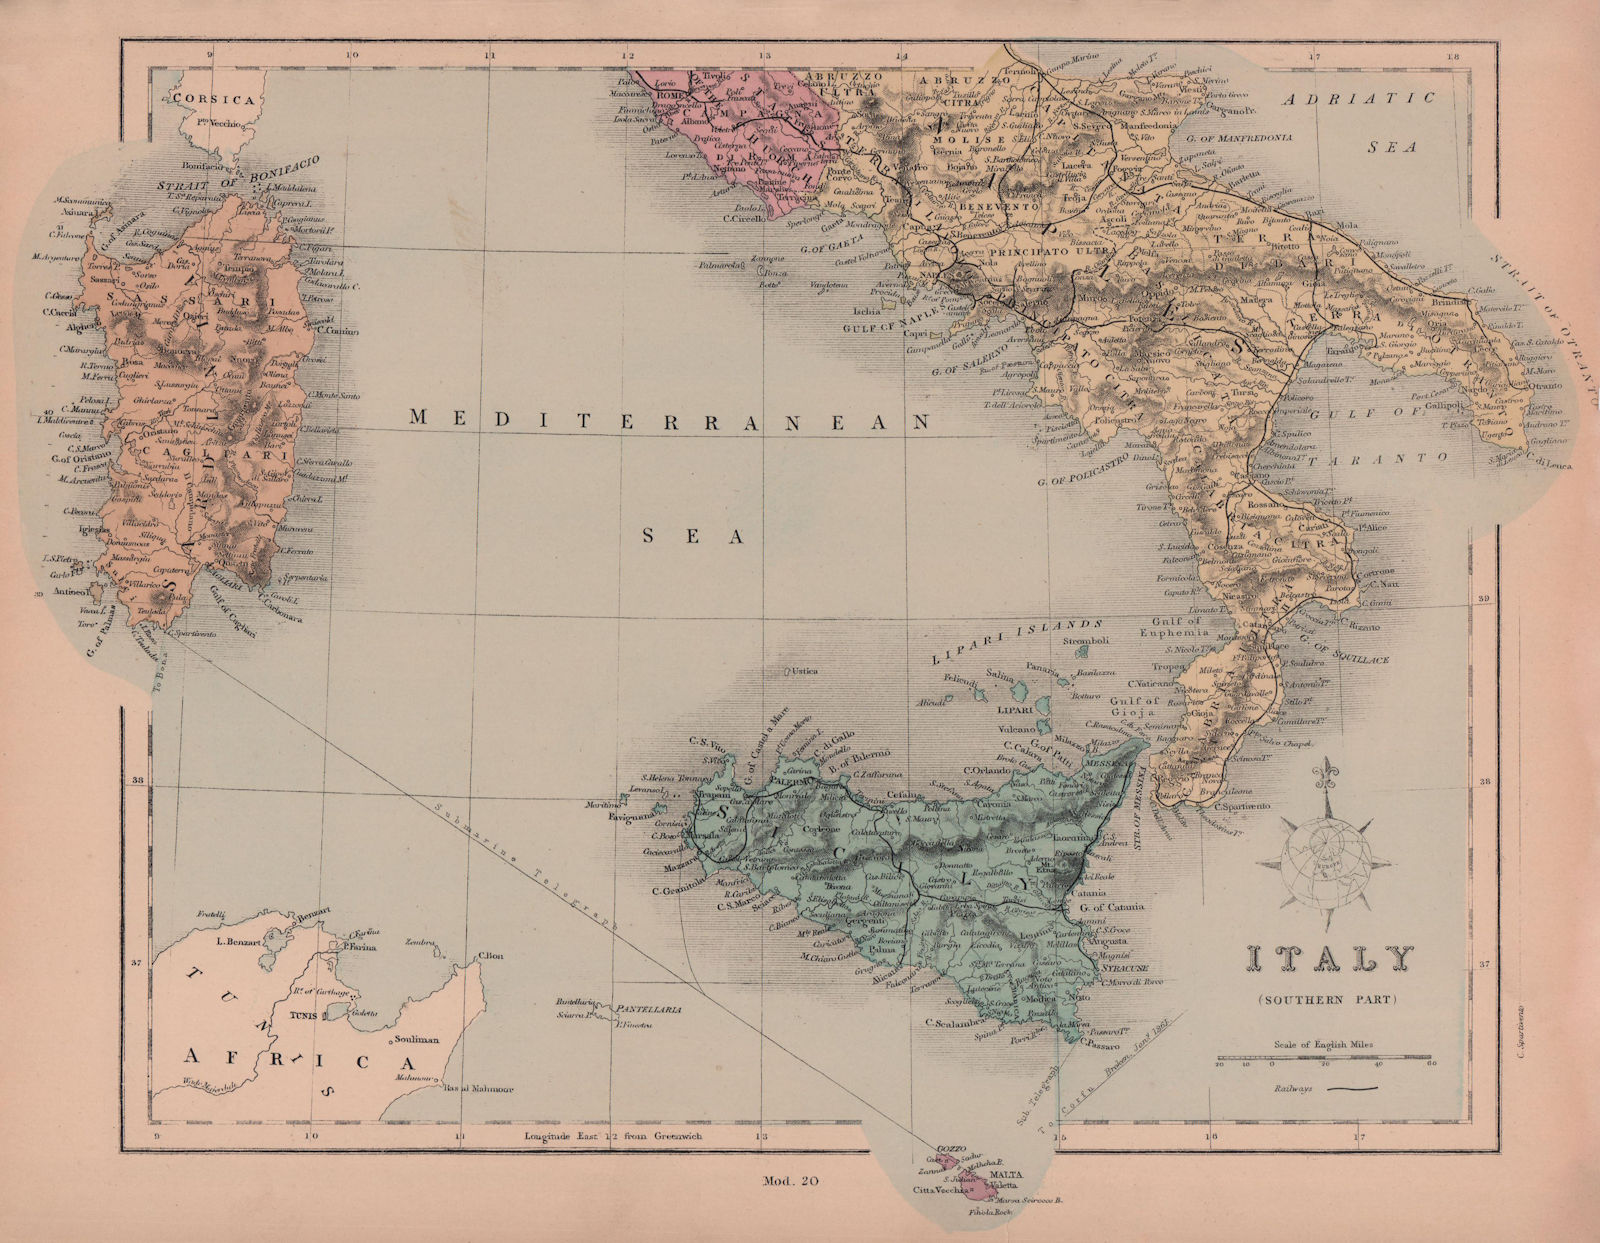 Associate Product Southern Italy. Sardinia & Sicily. Railways. HUGHES 1876 old antique map chart